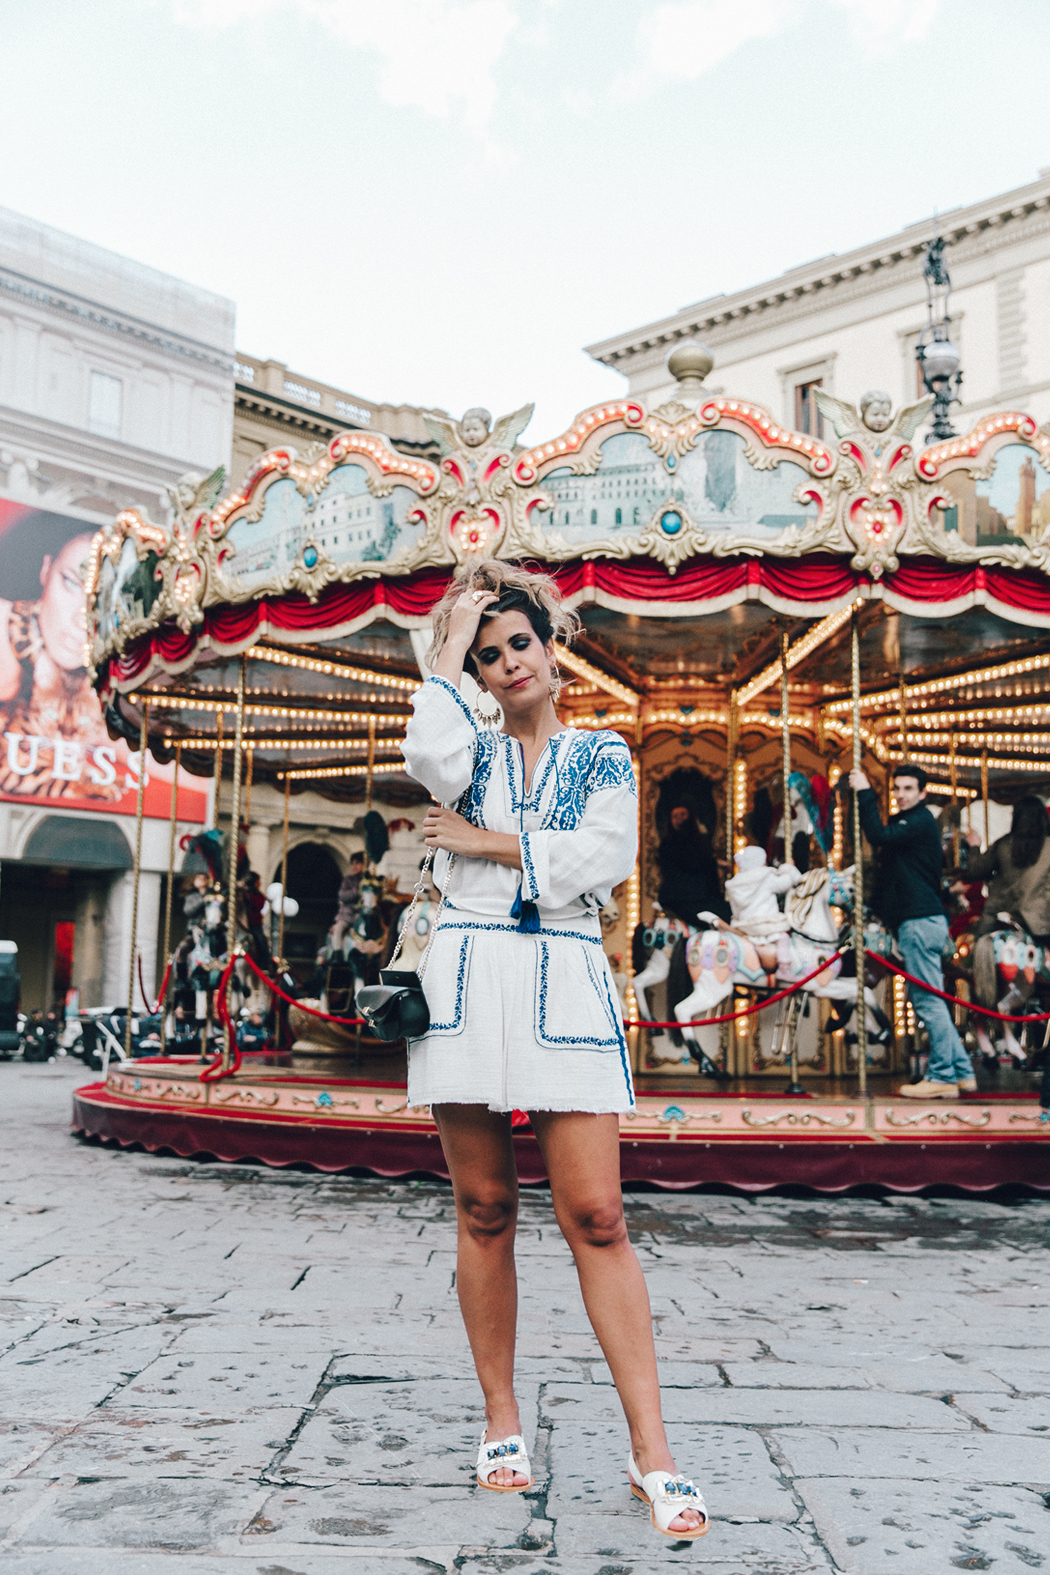 Firenze4Ever-Luisa_VIa_Roma-ISabel_Marant-Boho_Look-Marni_Sandals-Outfit-Florence-Street_Style-1